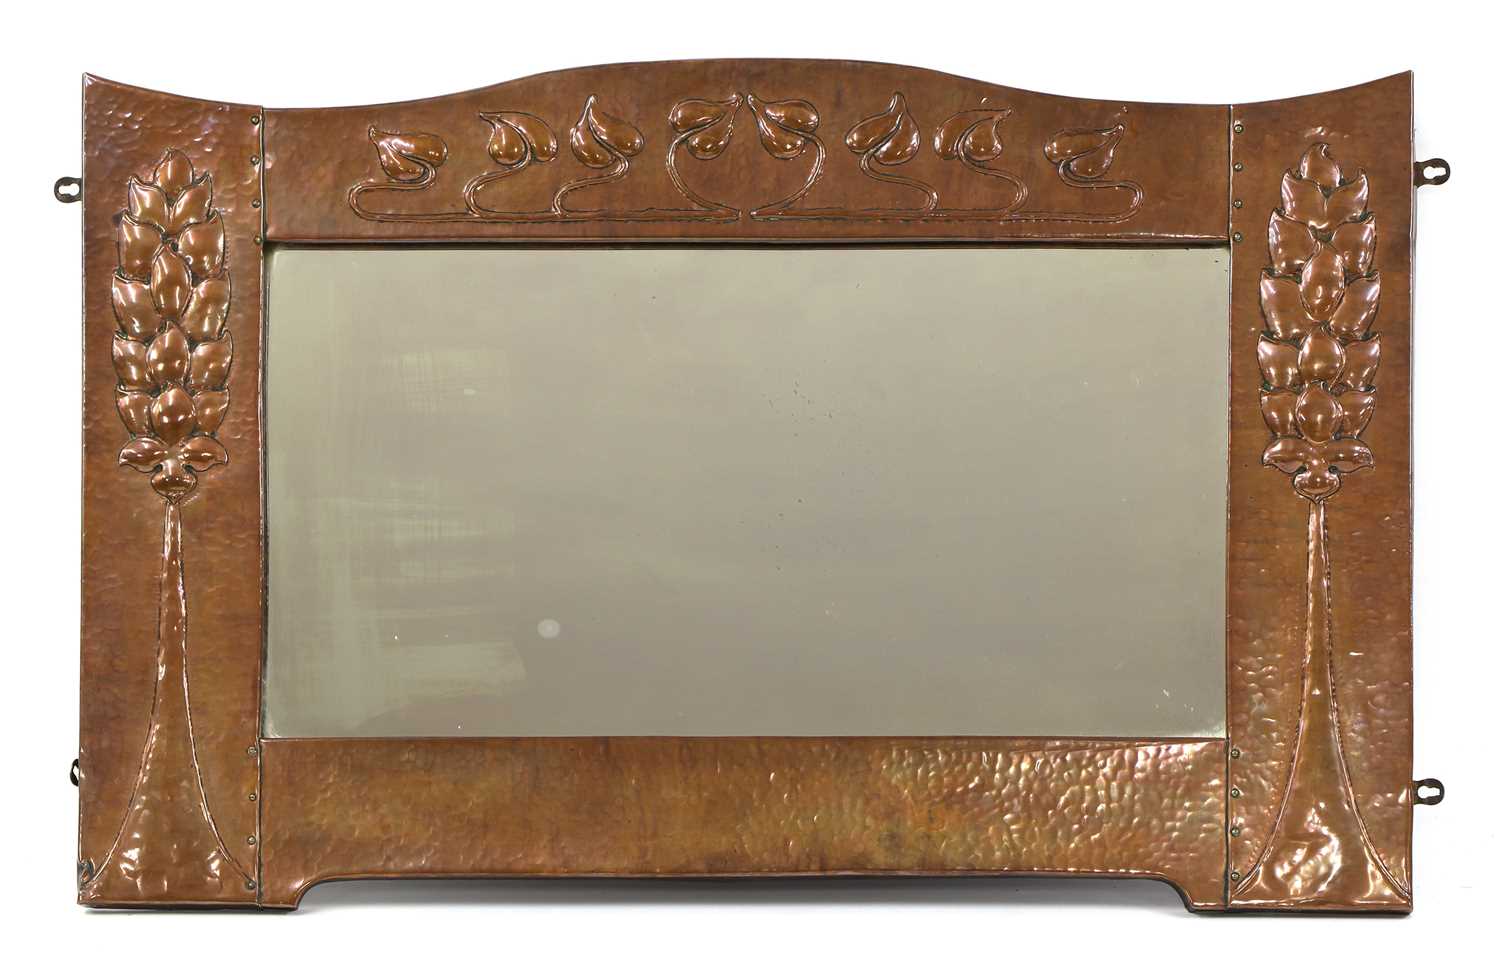 Lot 92 - A Scottish Arts and Crafts embossed copper wall mirror